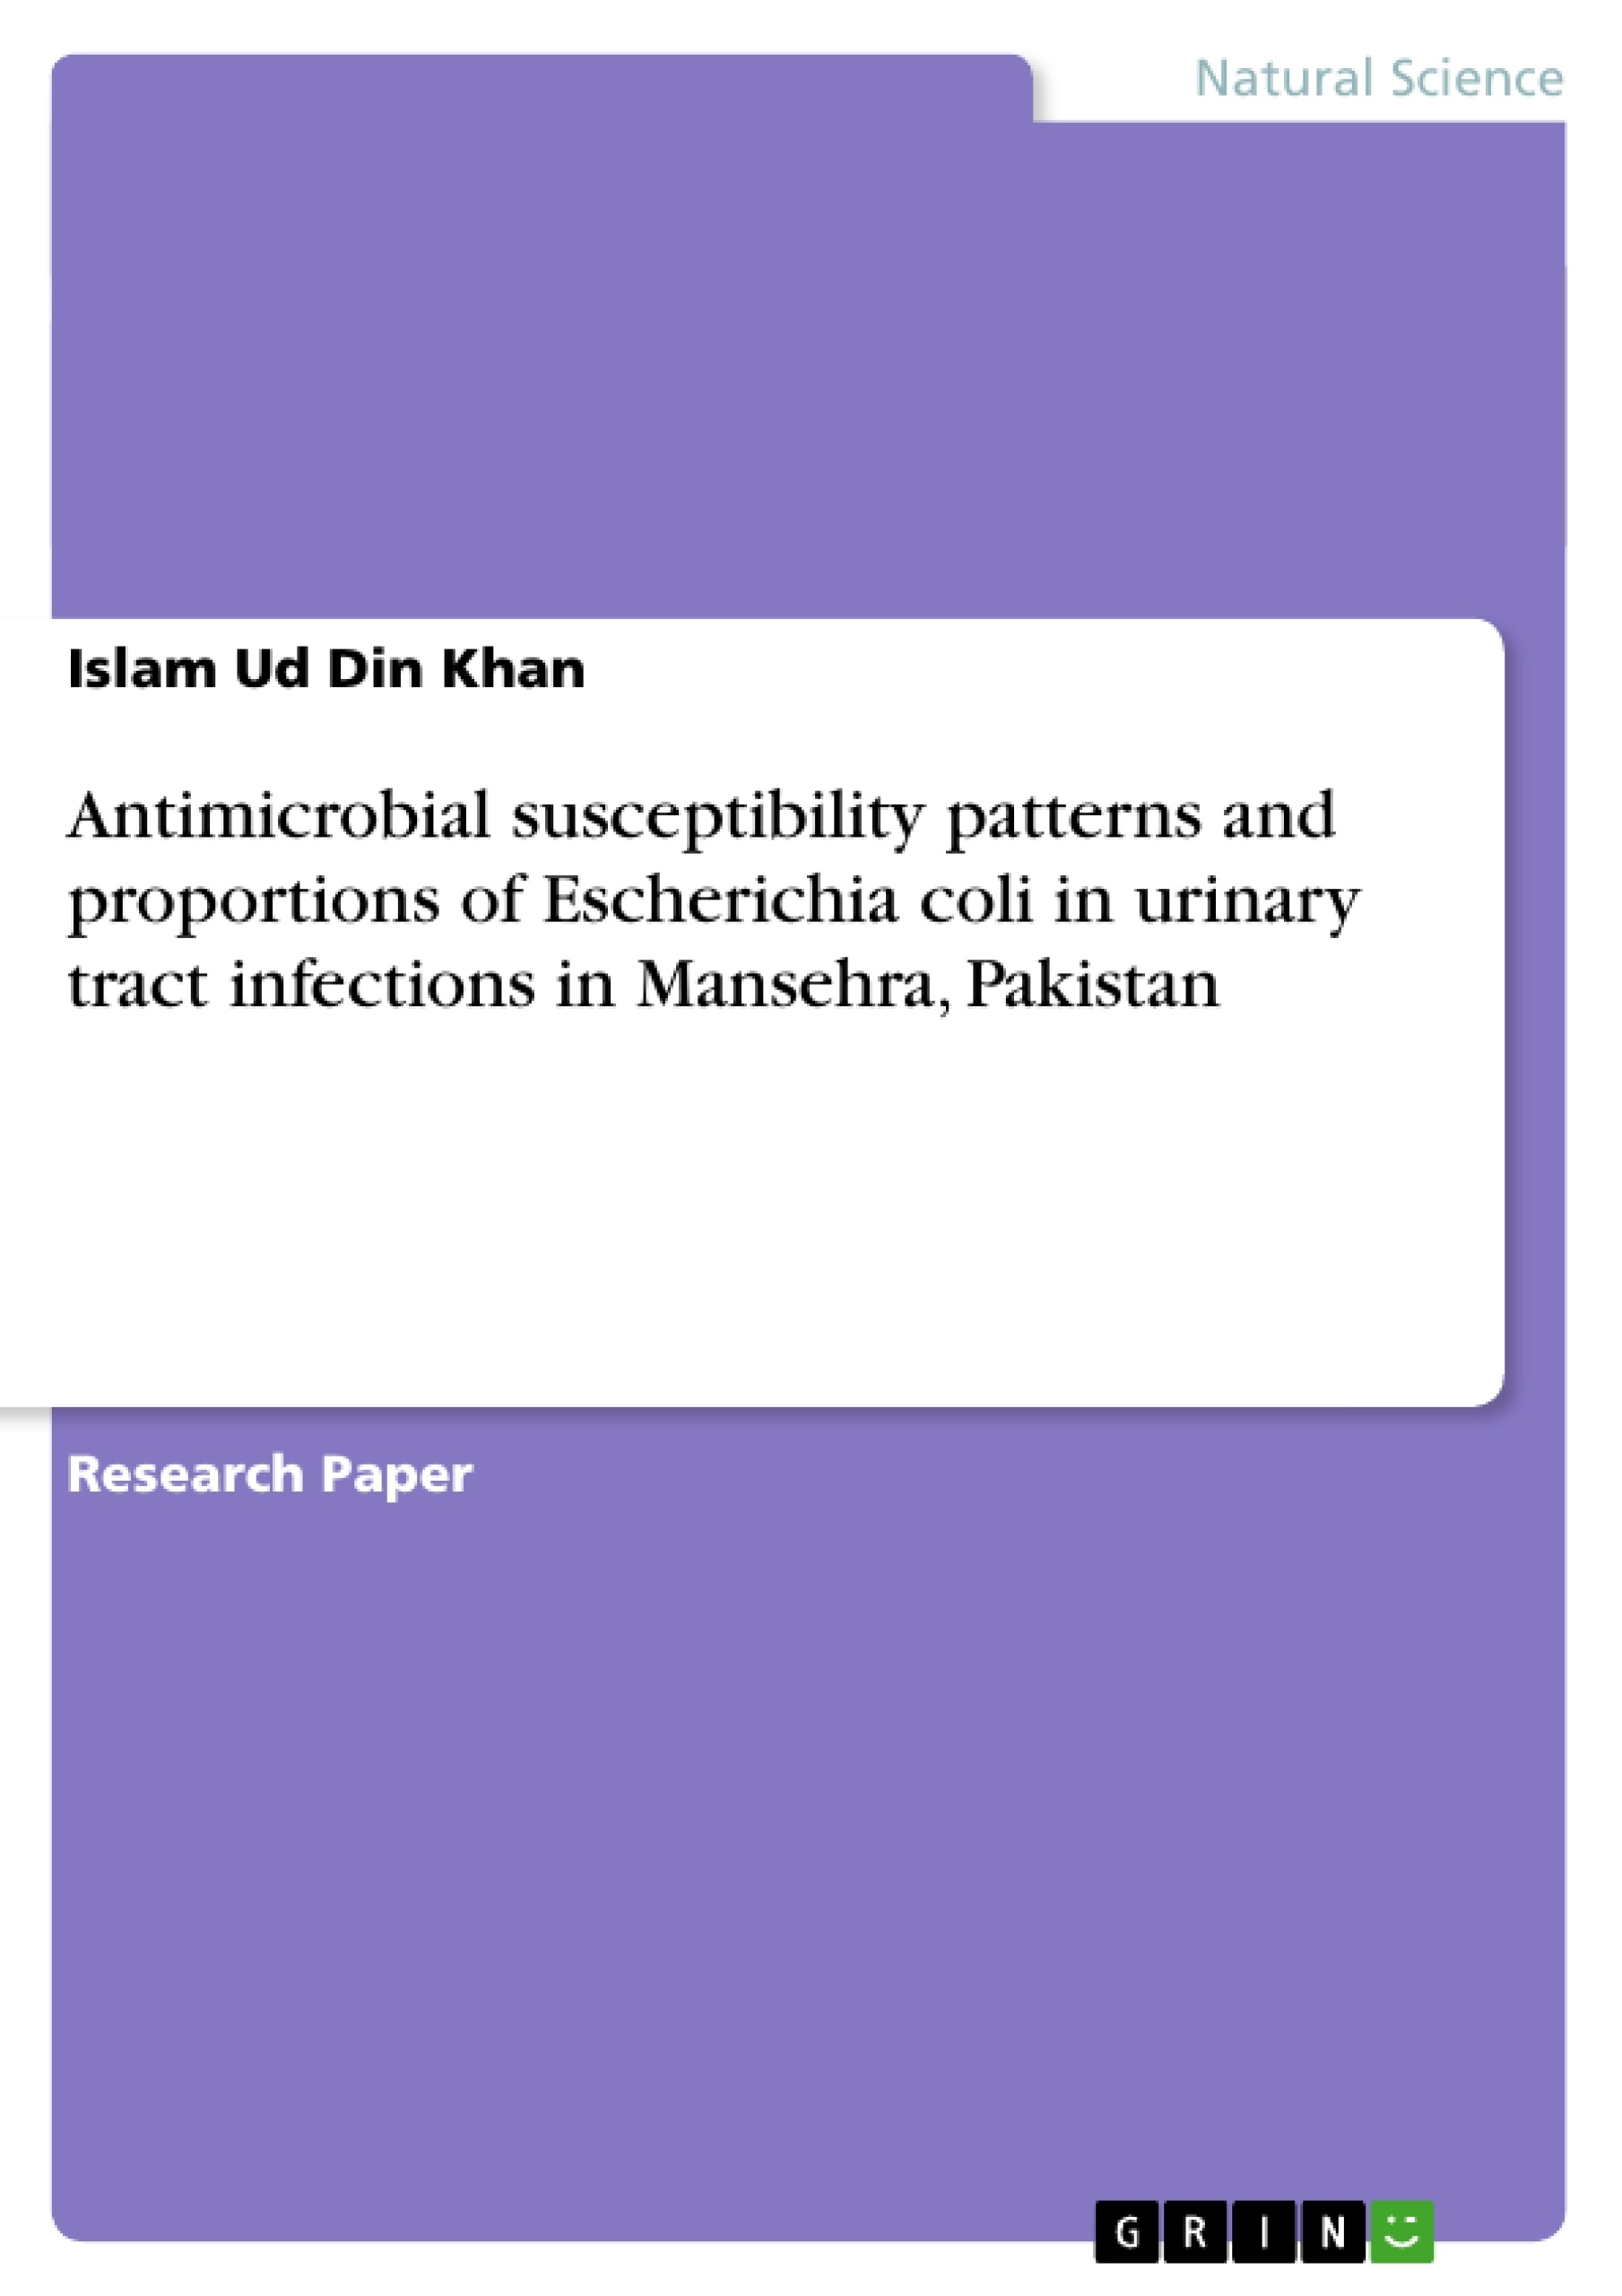 Titre: Antimicrobial susceptibility patterns and proportions of Escherichia coli in urinary tract infections in Mansehra, Pakistan